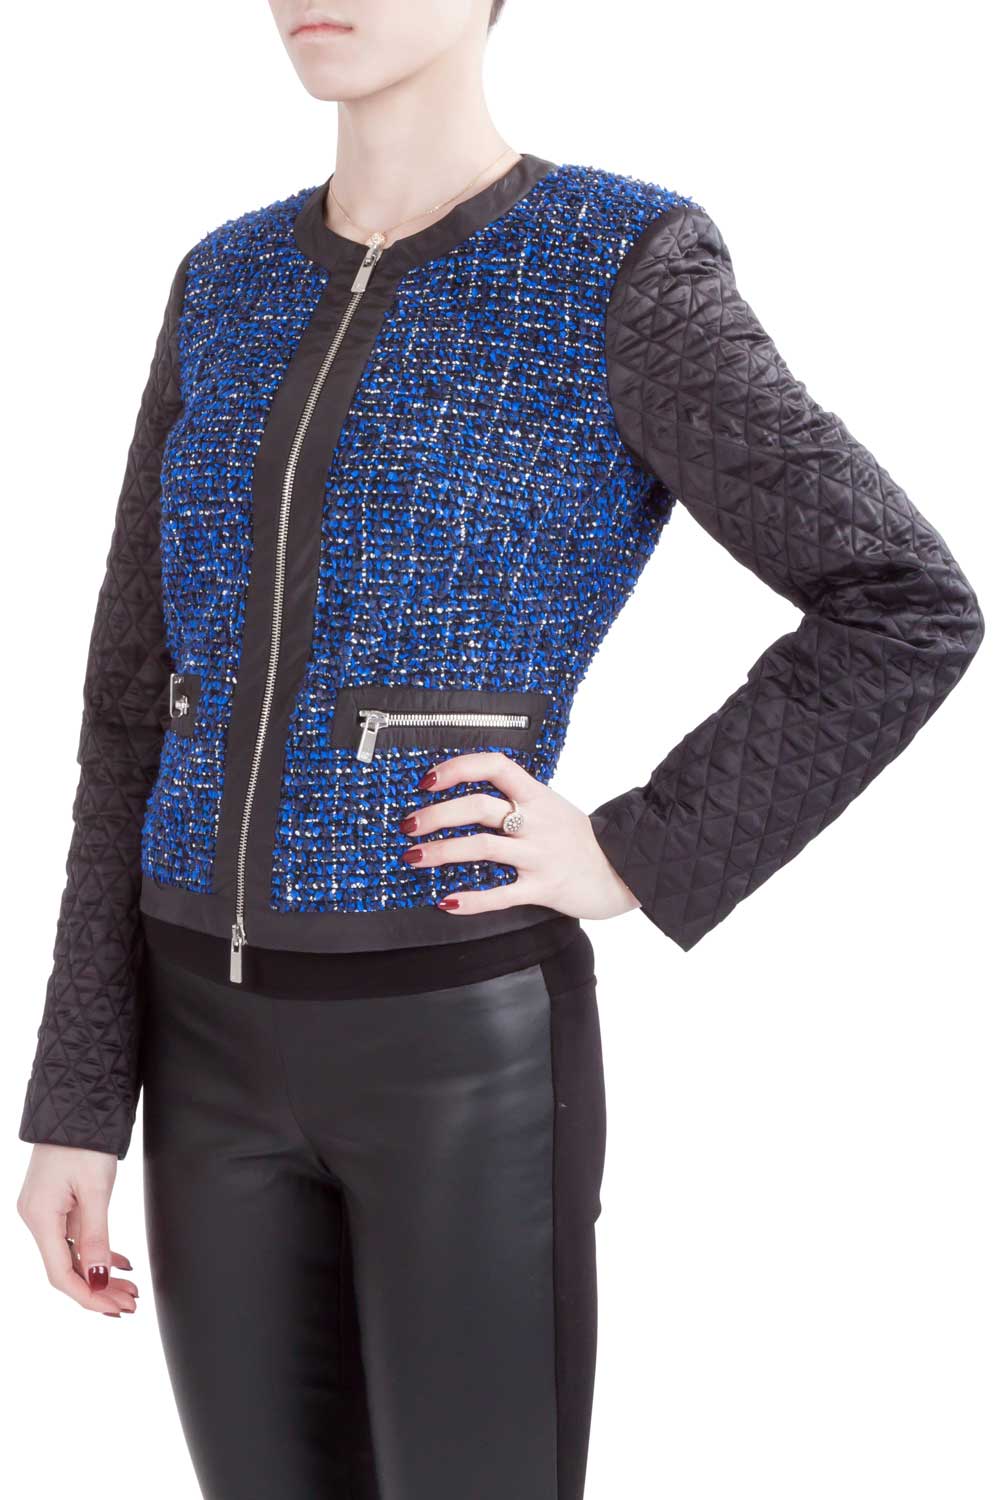 Michael  Kors Blue and Black Tweed Quilted Sleeve Detail Zip Front Jacket S